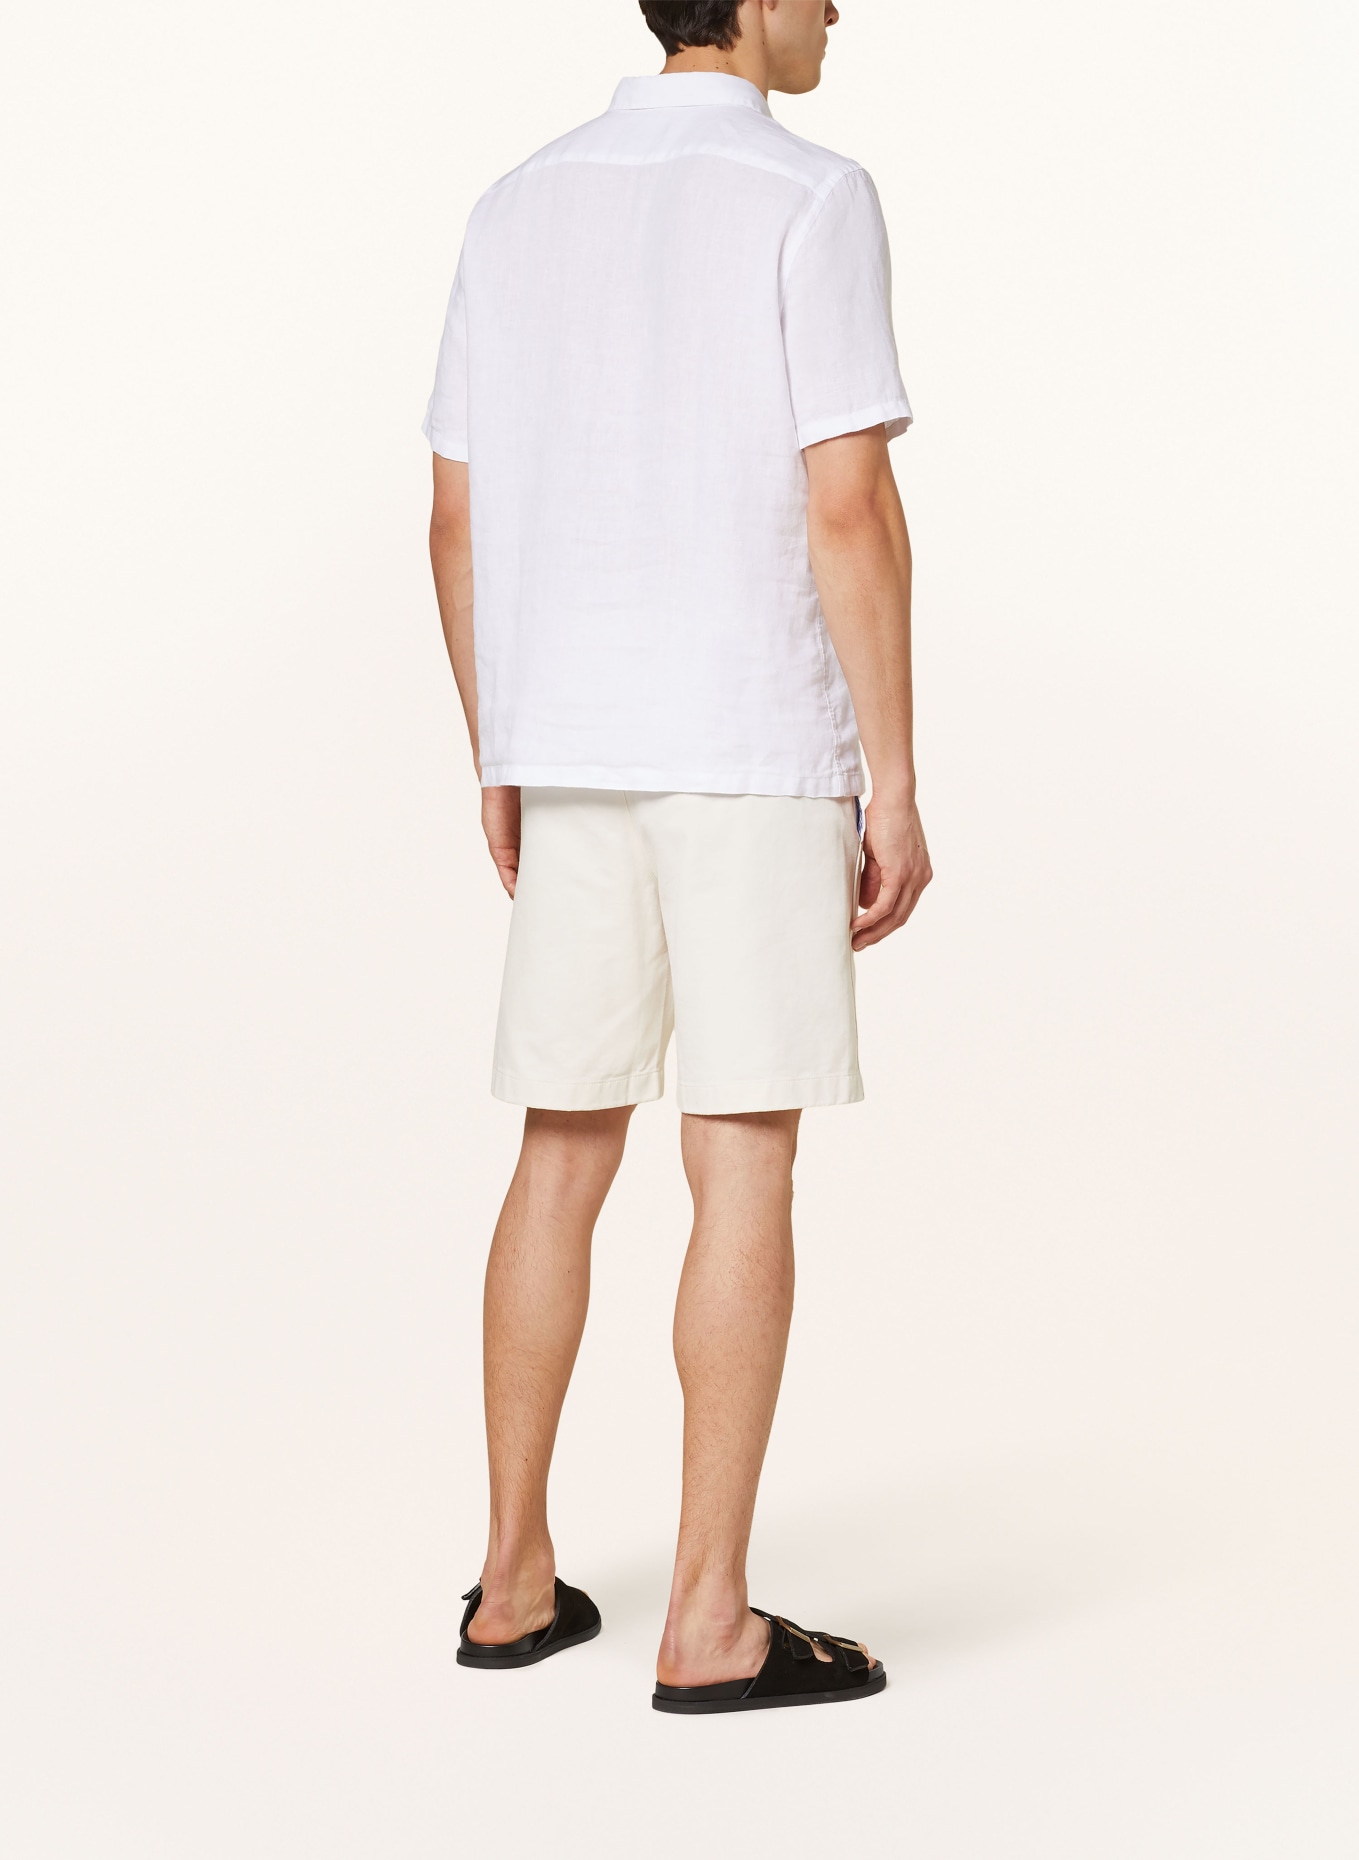 MAERZ MUENCHEN Short sleeve shirt modern fit in linen, Color: WHITE (Image 3)